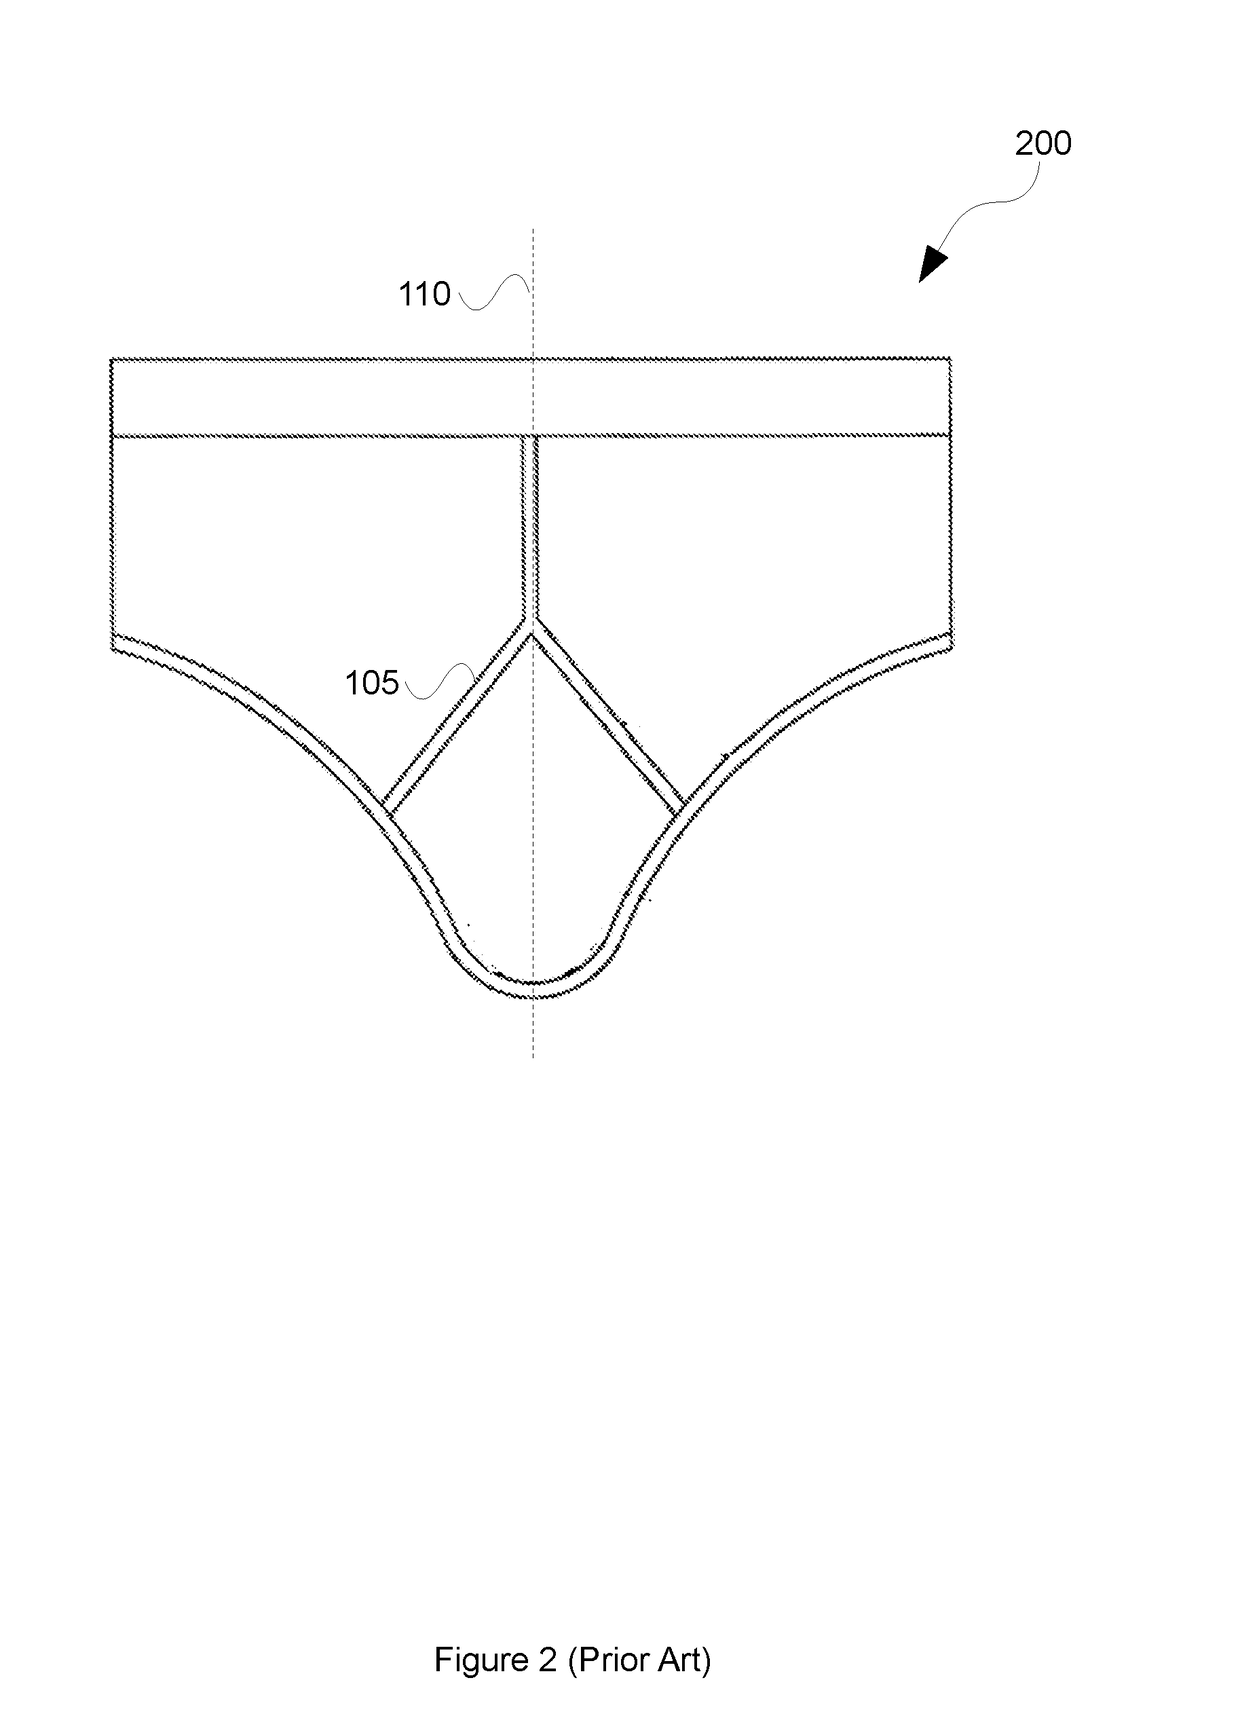 A garment having a substantially centrally located access aperture